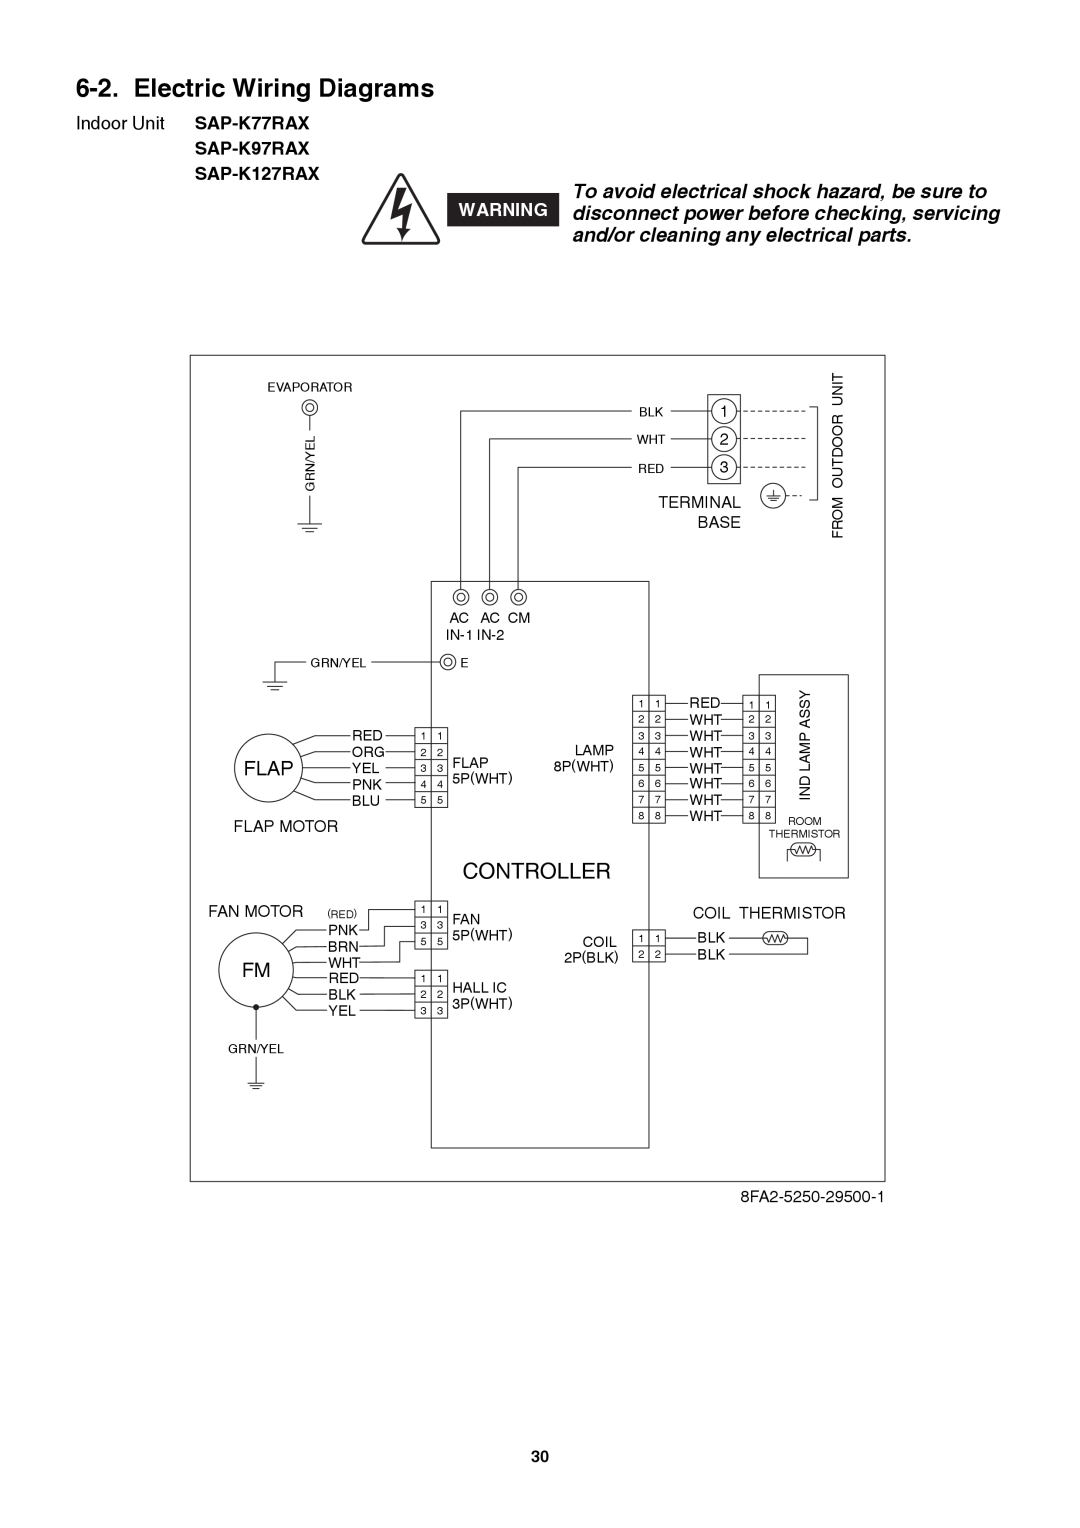 Sanyo SAP-K77RAX Electric Wiring Diagrams, Controller, and/or cleaning any electrical parts, SAP-K97RAX SAP-K127RAX 